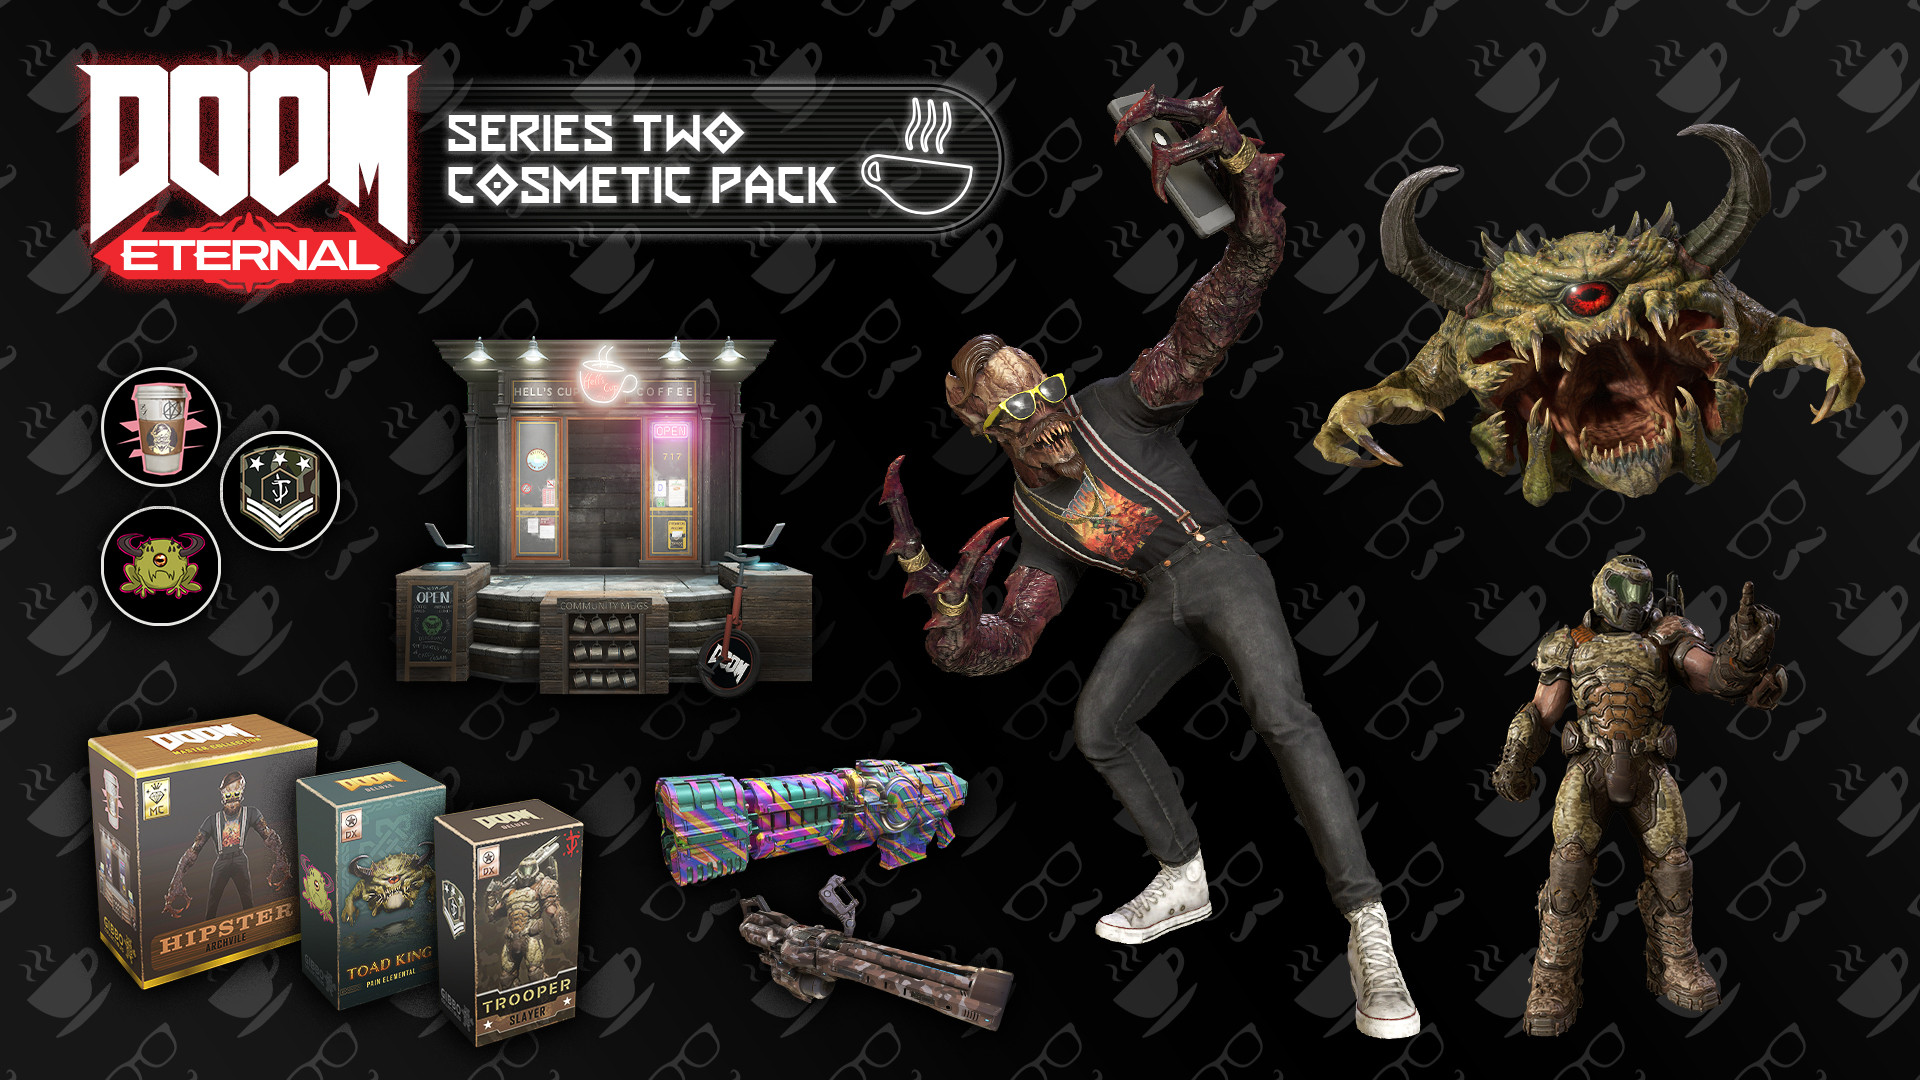 Nintendo AOC DOOM Eternal: Series Two Cosmetic Pack DLC (extra content)